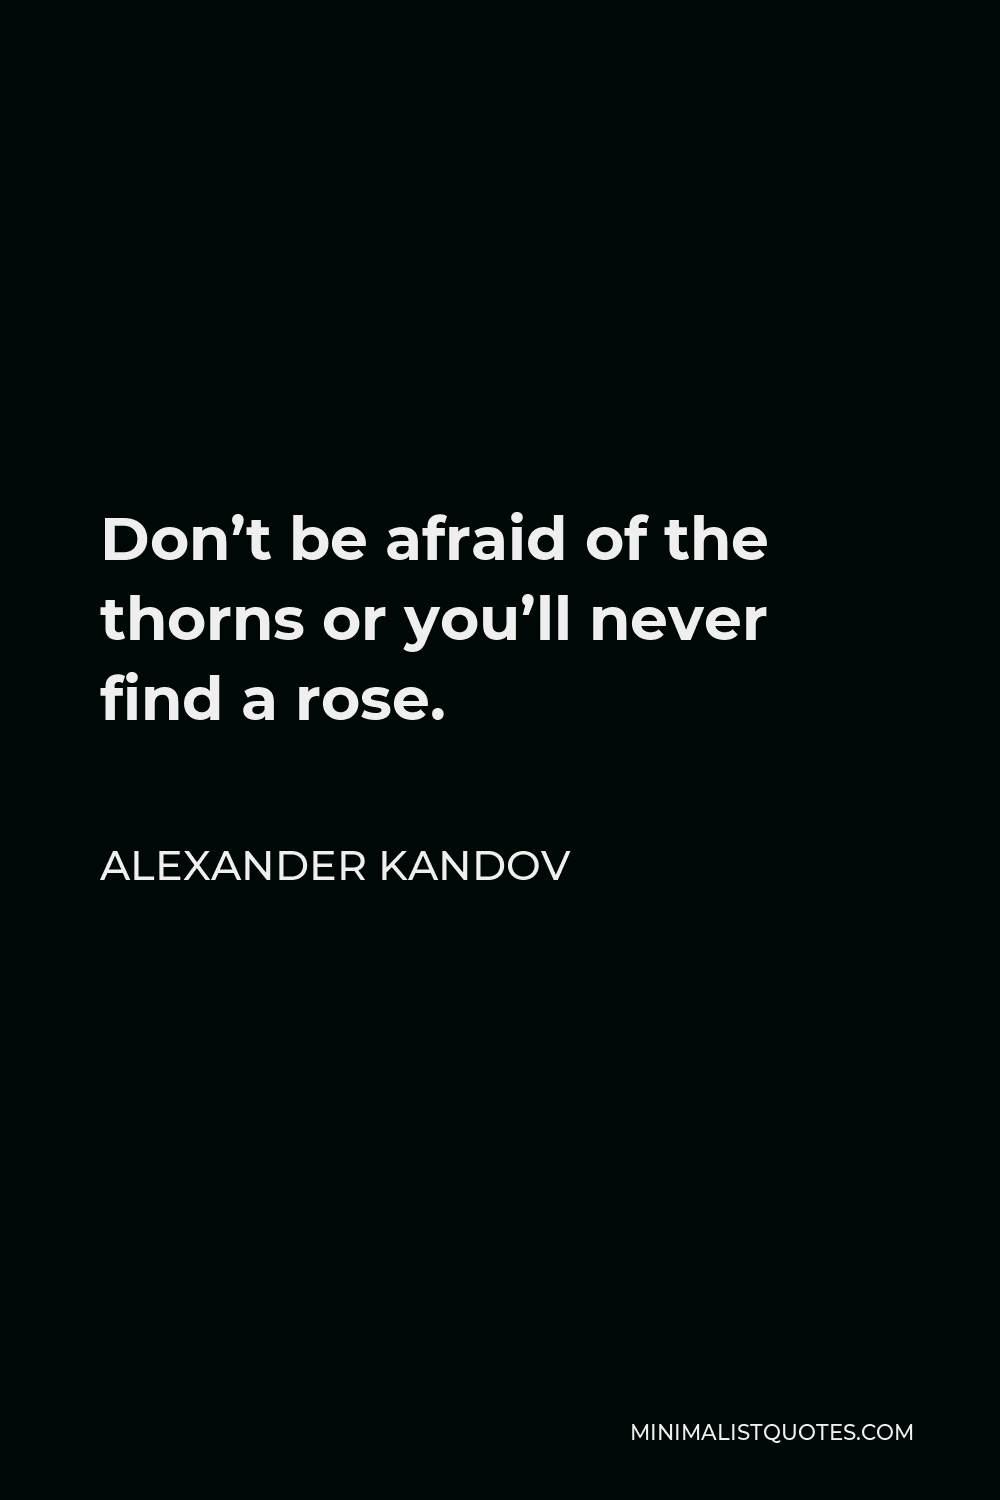 Alexander Kandov Quote - Don’t be afraid of the thorns or you’ll never find a rose.